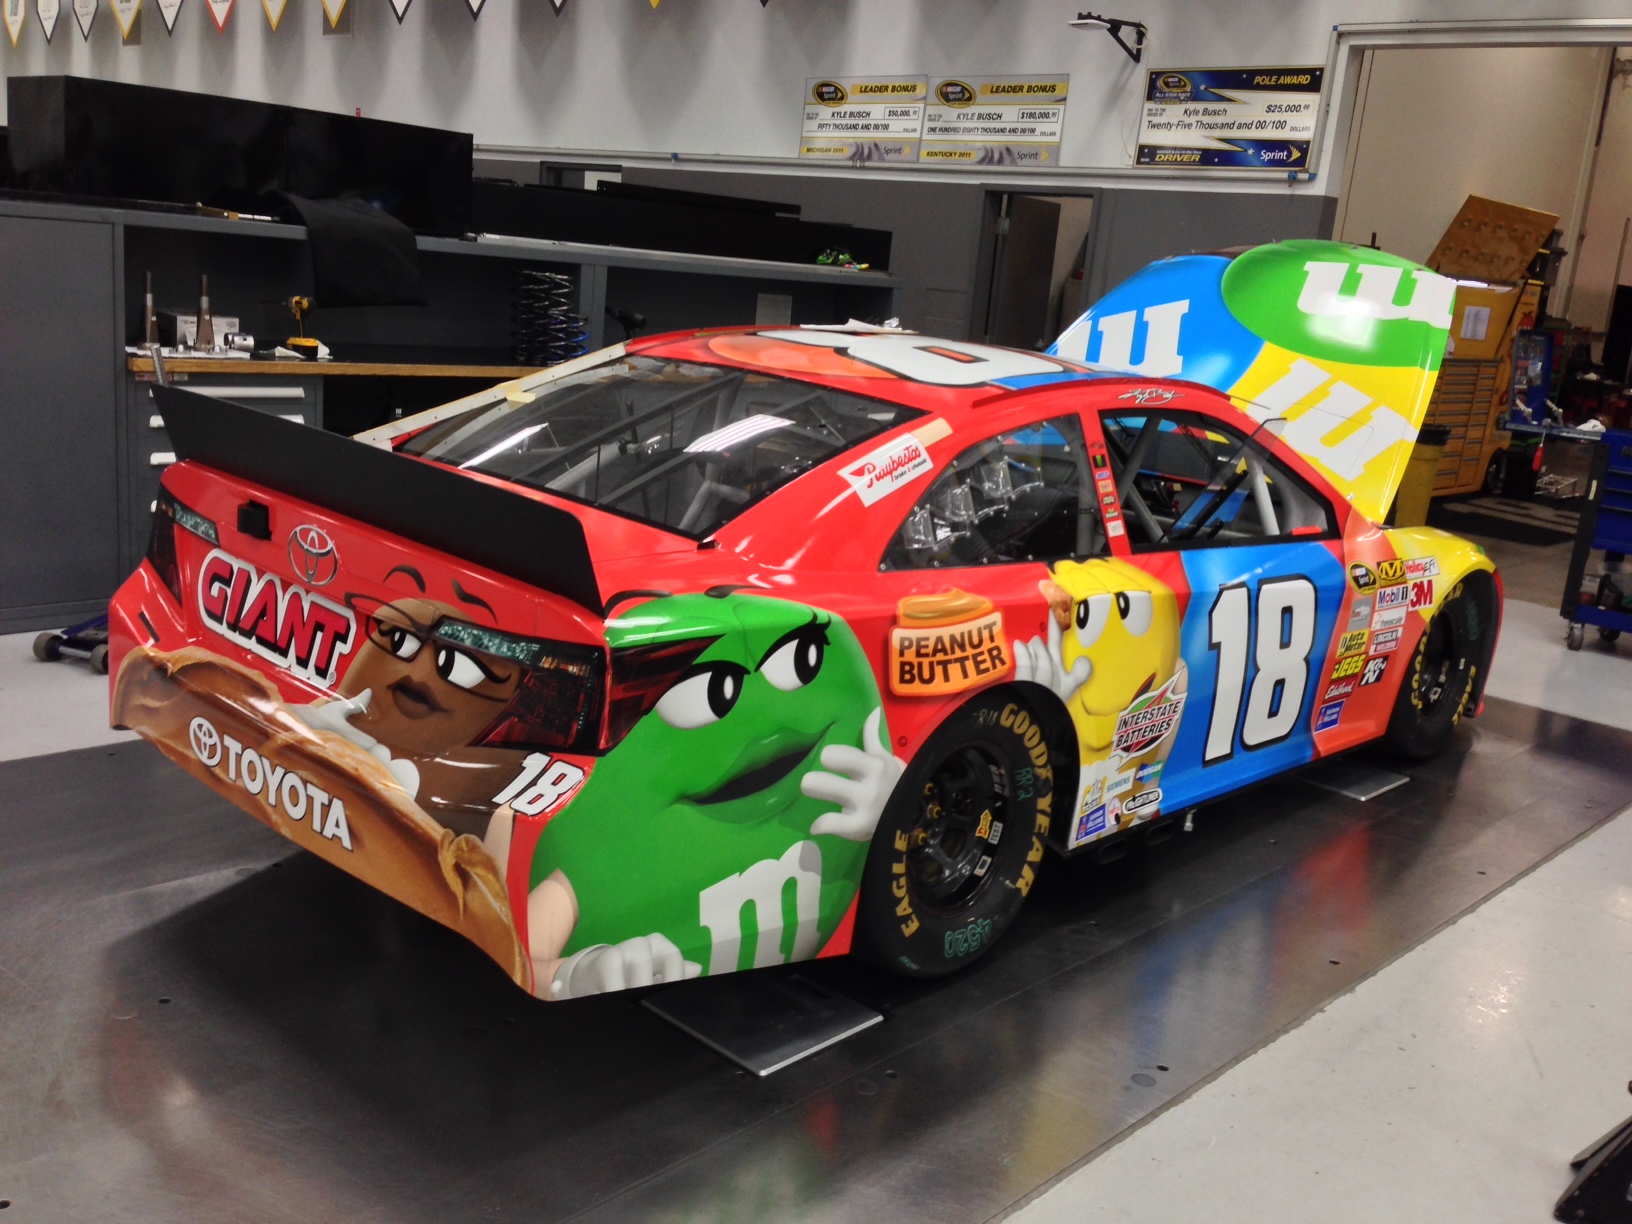 Kyle Busch's paint scheme scheduled to run at Pocono in August and New Hampshire in Sept  Photo - Joe Gibbs Racing